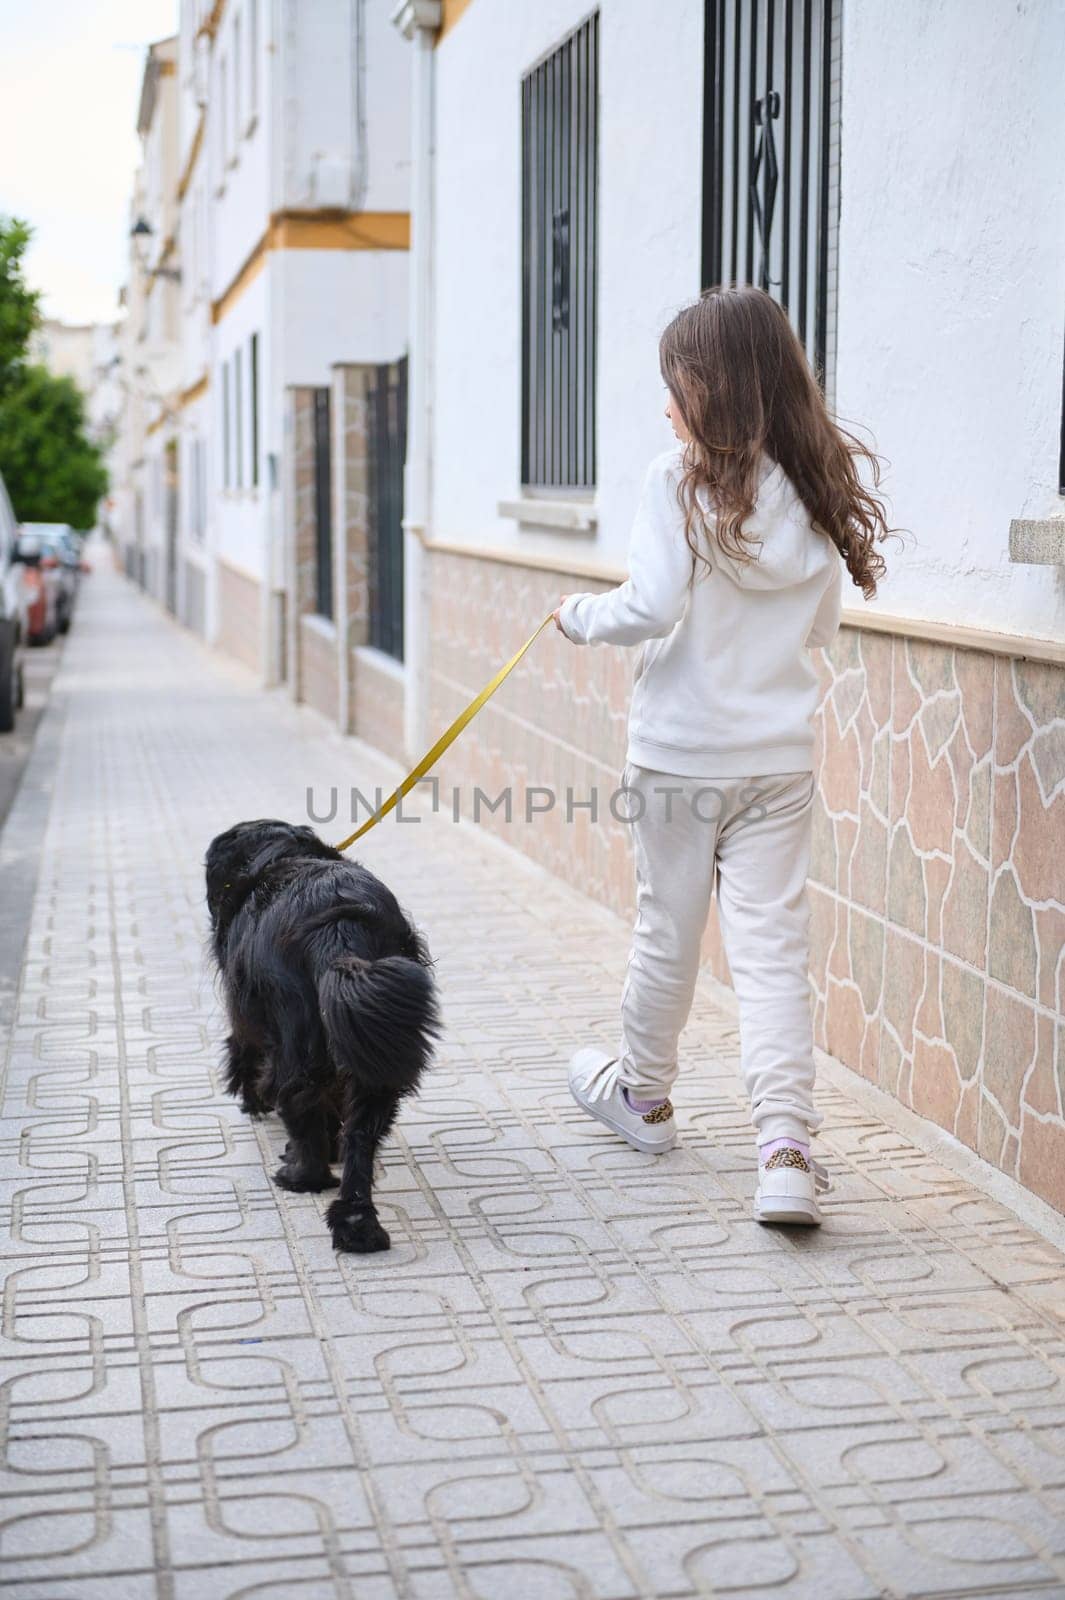 Full length rear view of a cute little kid girl in sportswear, walking her dog, a purebred black cocker spaniel on leash on the street. People and animals. Playing pets concept by artgf